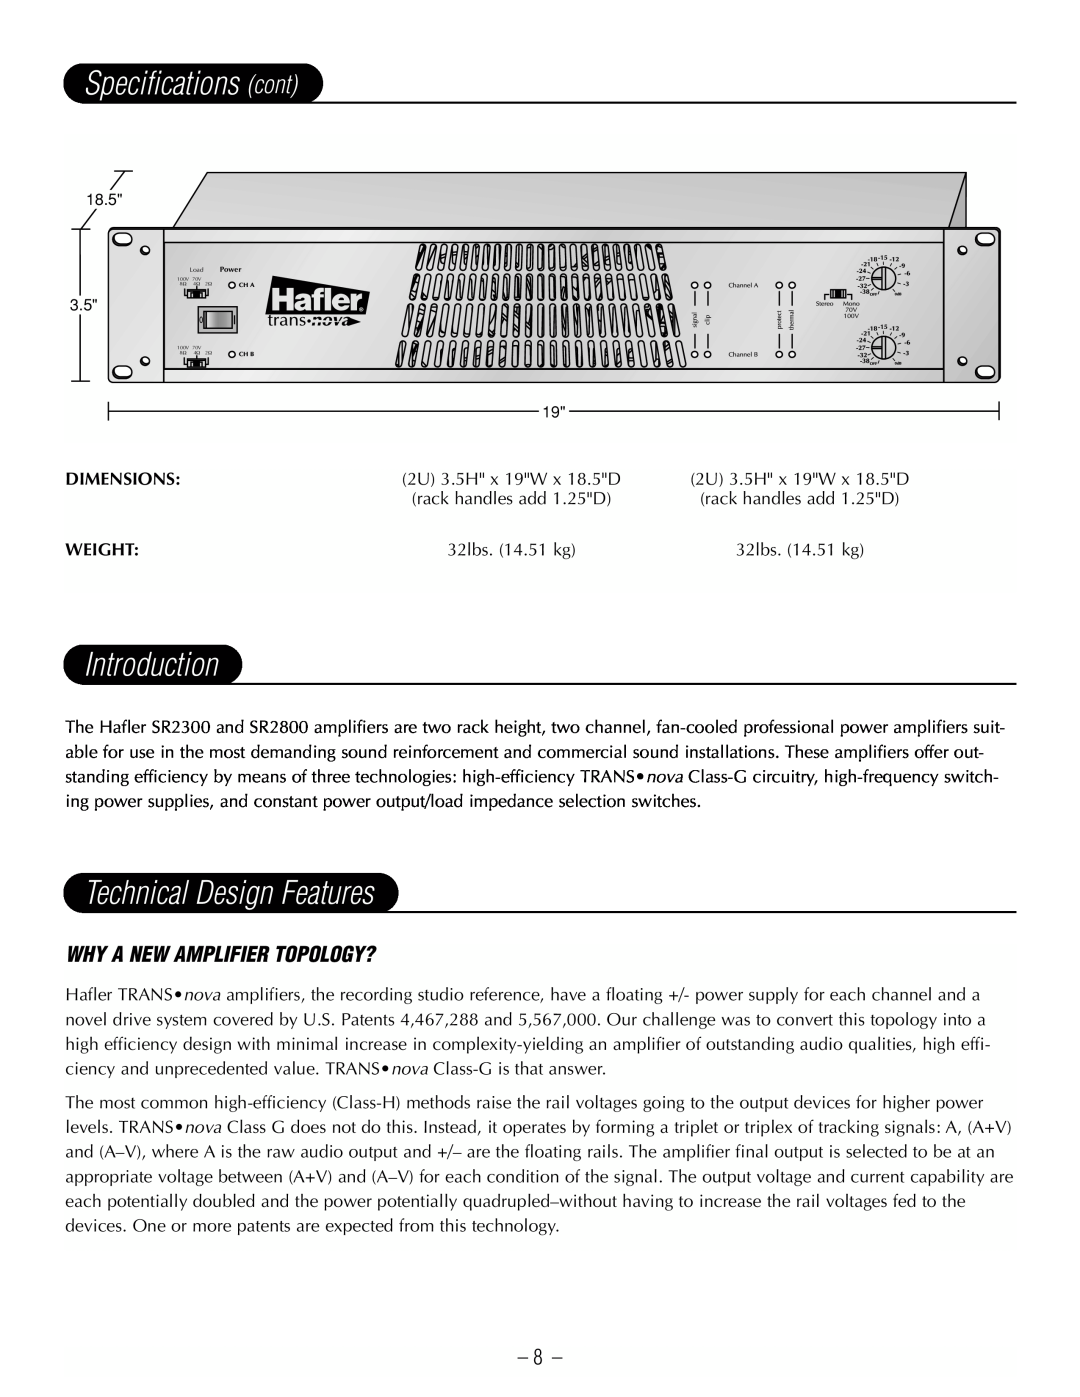 Hafler SR2800 Specifications cont, Introduction, Technical Design Features, Why A New Amplifier Topology?, Dimensions 